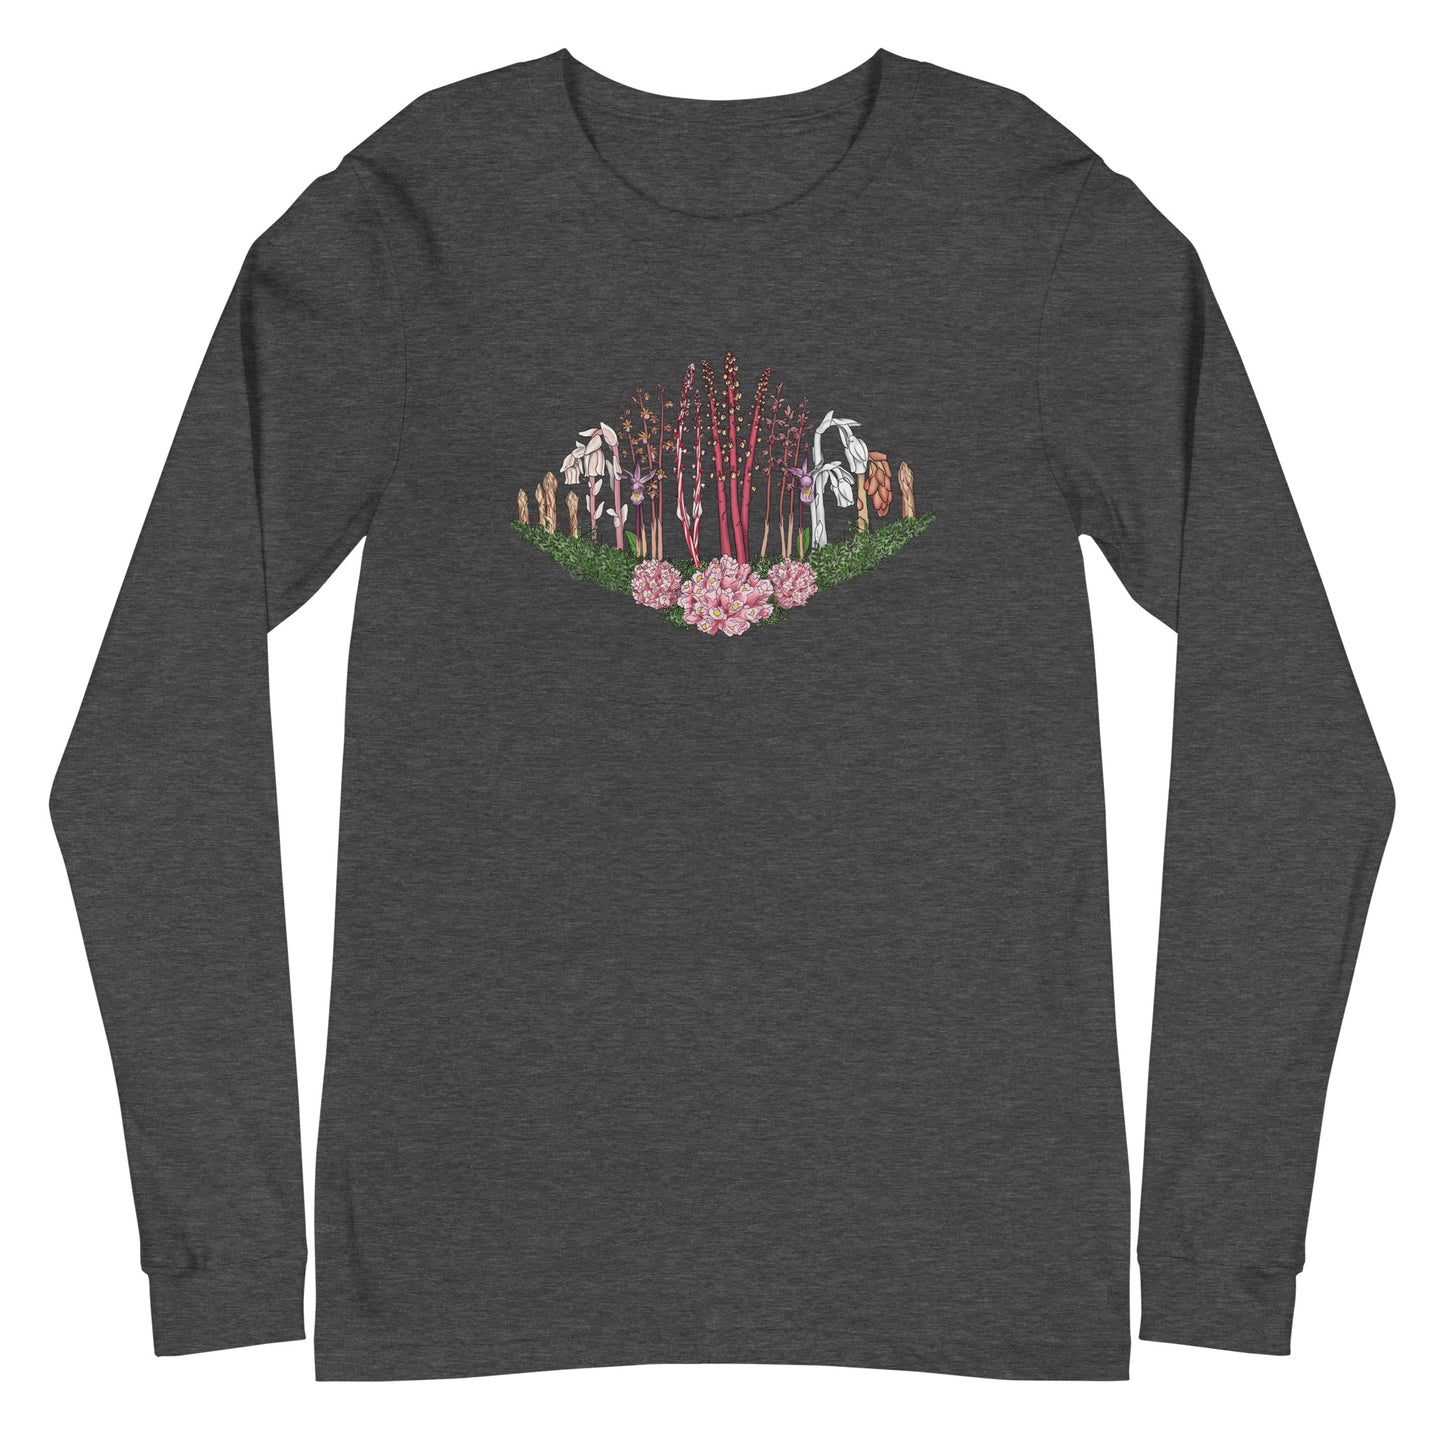 A long-sleeve t-shirt with an image of Ghost pipe, Candystick, pine sap and other micoheterotrophic plants of the PNW.